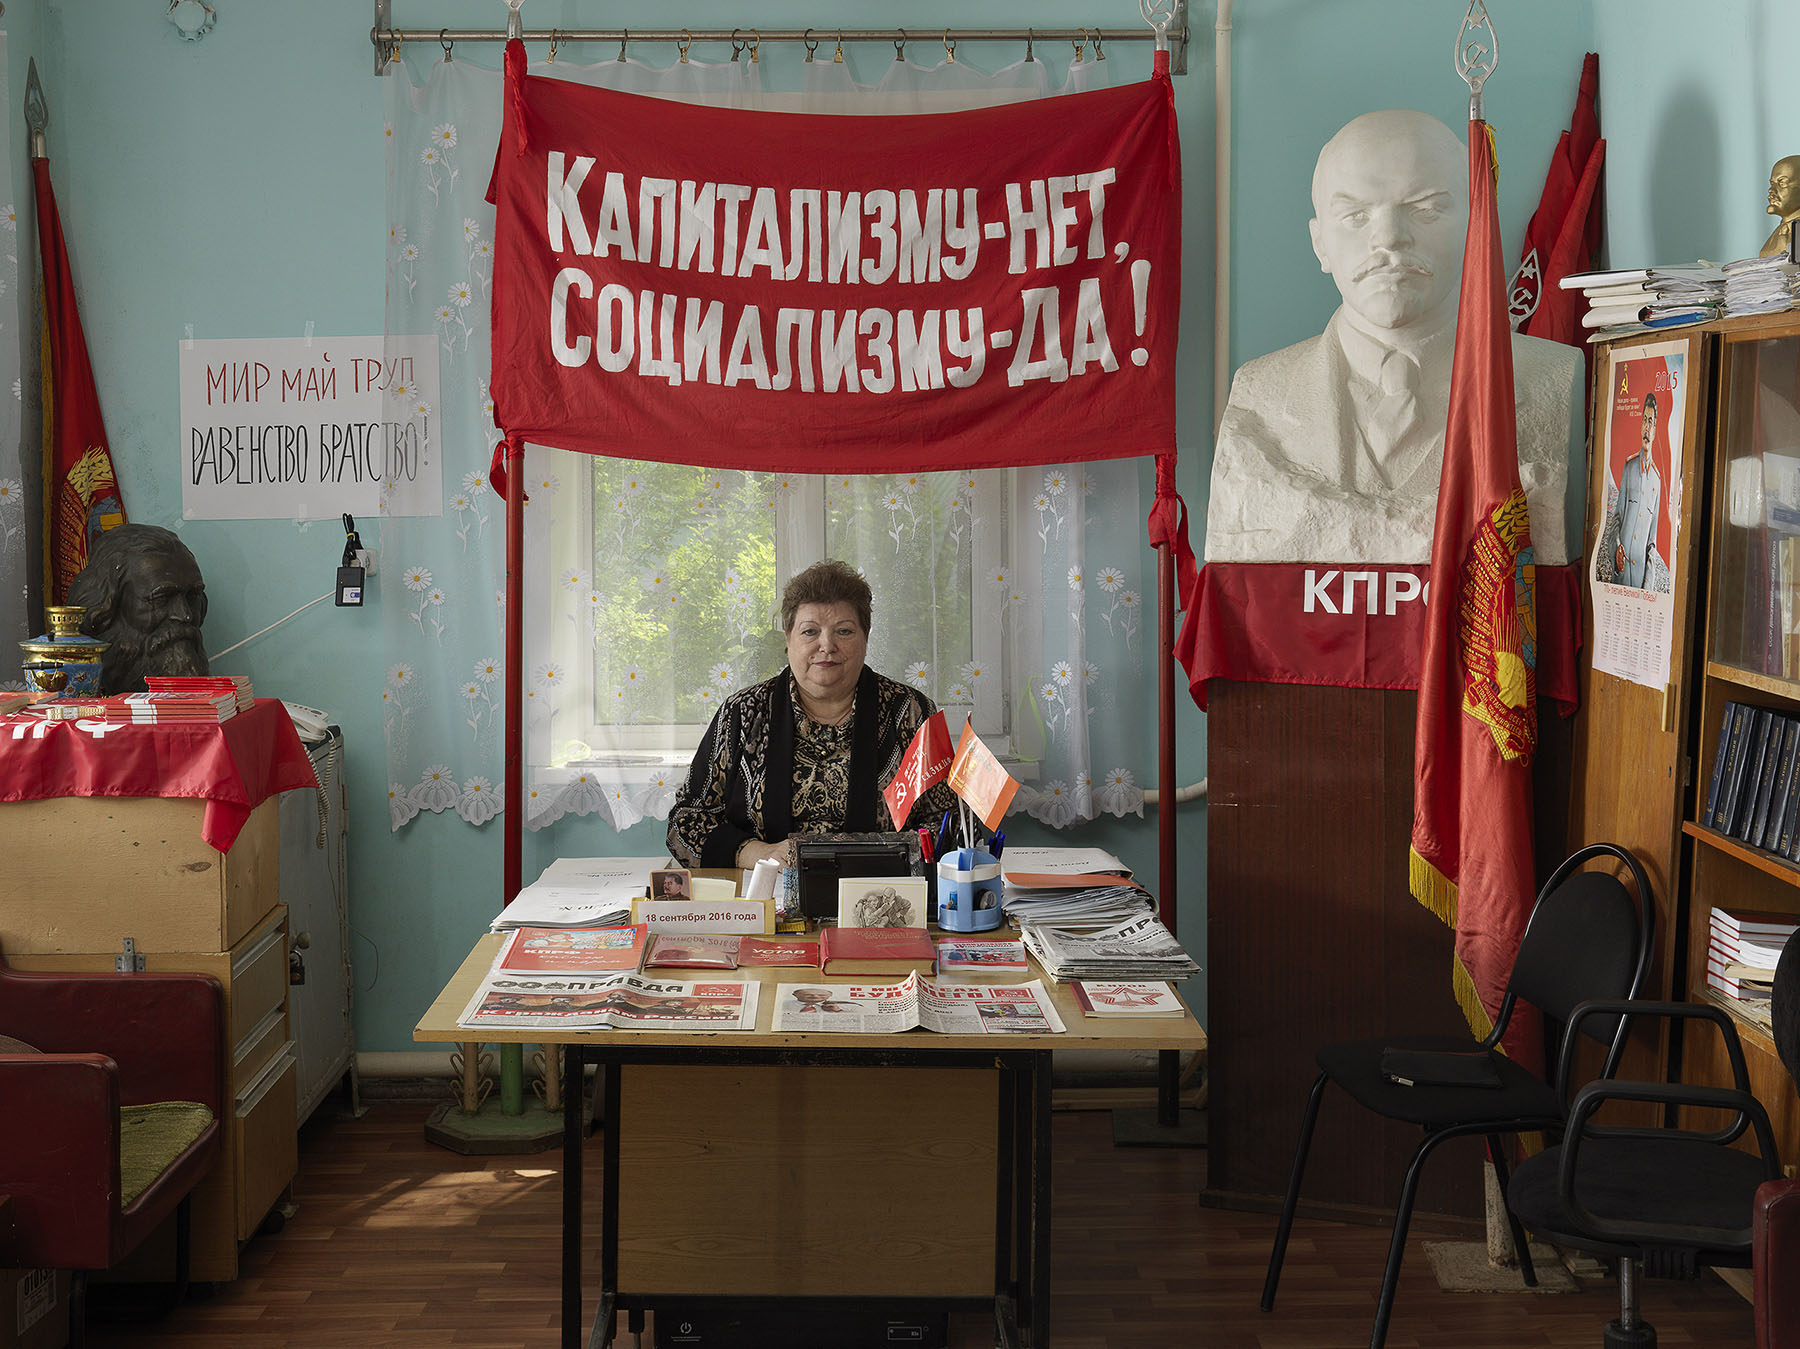 Communism in Russia. Communist Party of the Russian Federation: Kirov district office, Kaluga province. First Secretary Valentina Gelperina.